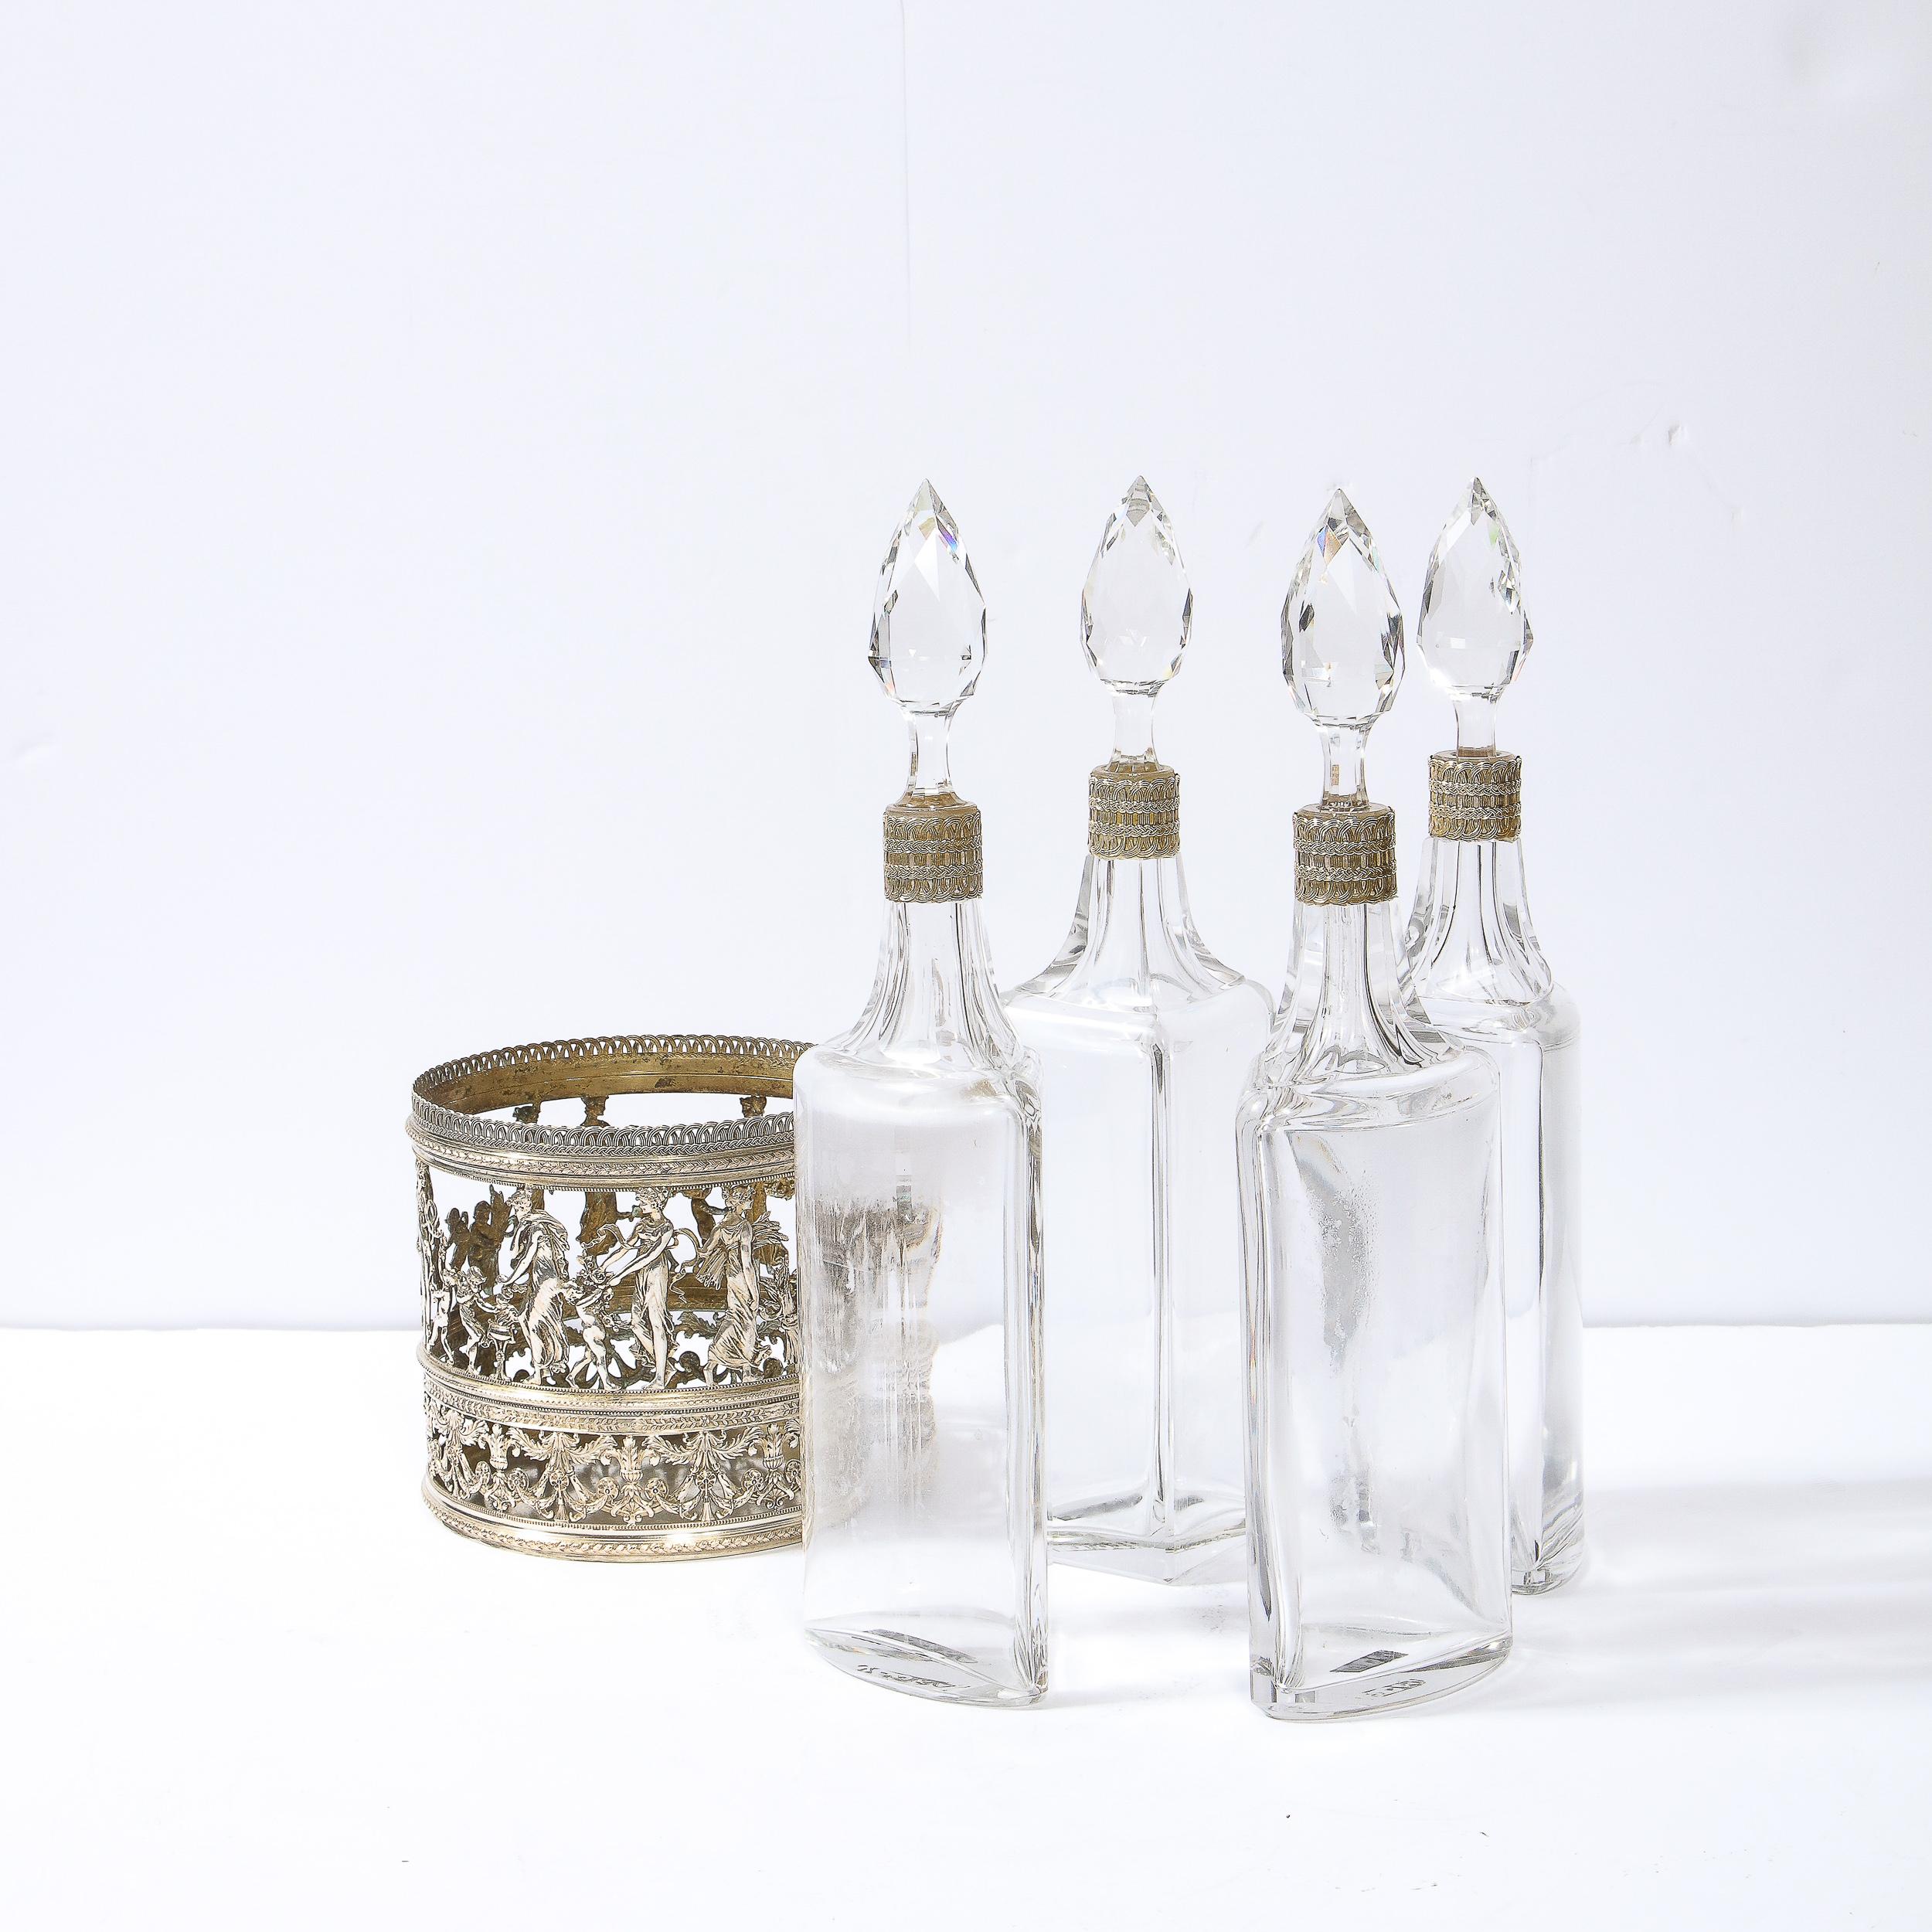 19th Century Neoclassical Figurative Silver Plate & Cut Crystal Decanter Set For Sale 5